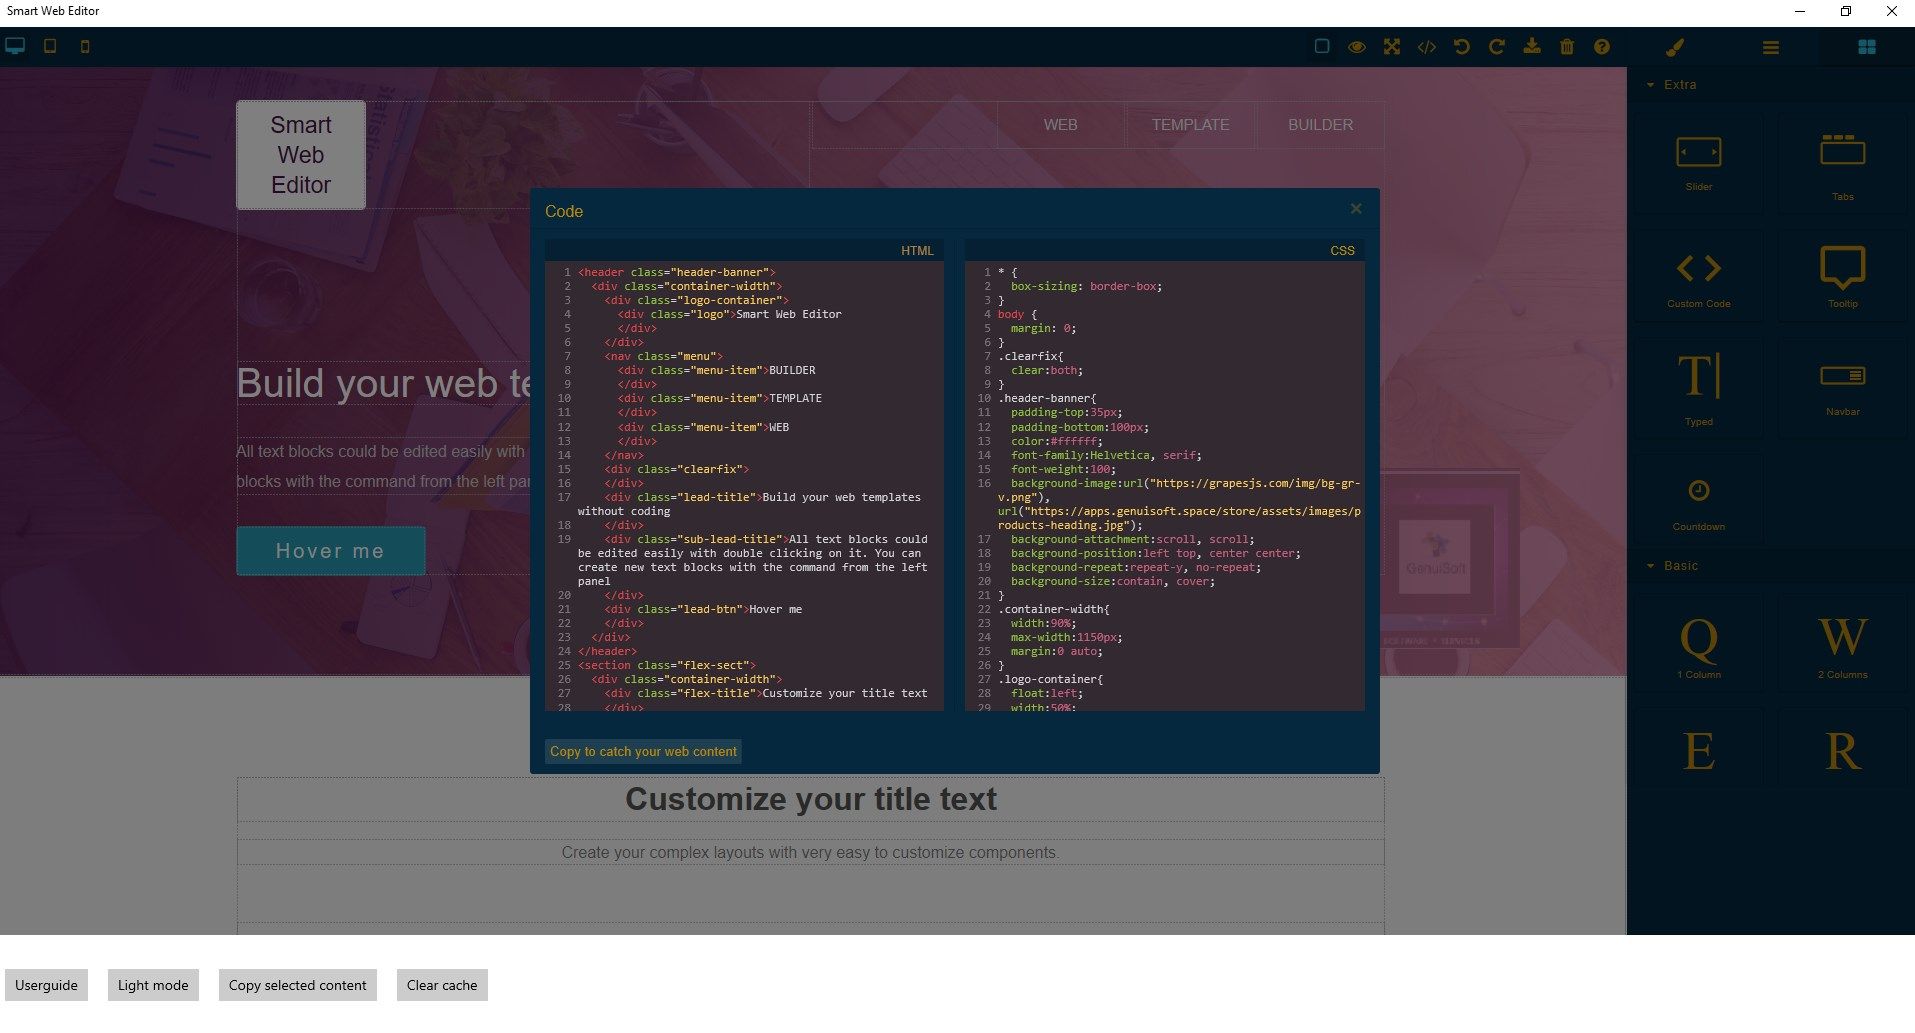 Retreive the complete HTML & CSS code for your web content